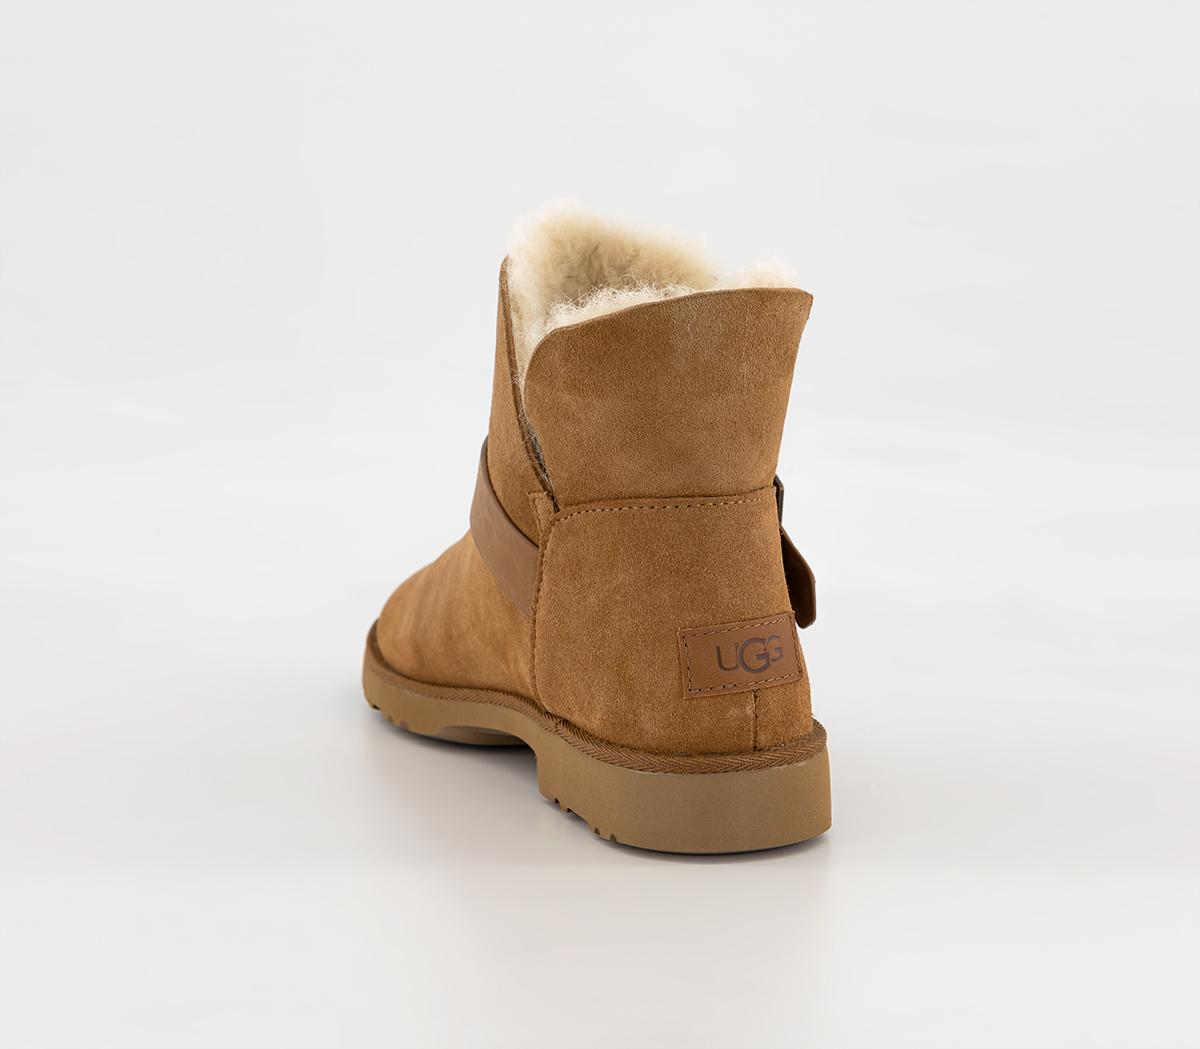 UGG Romely Short Buckle Boots Chestnut - Women's Boots